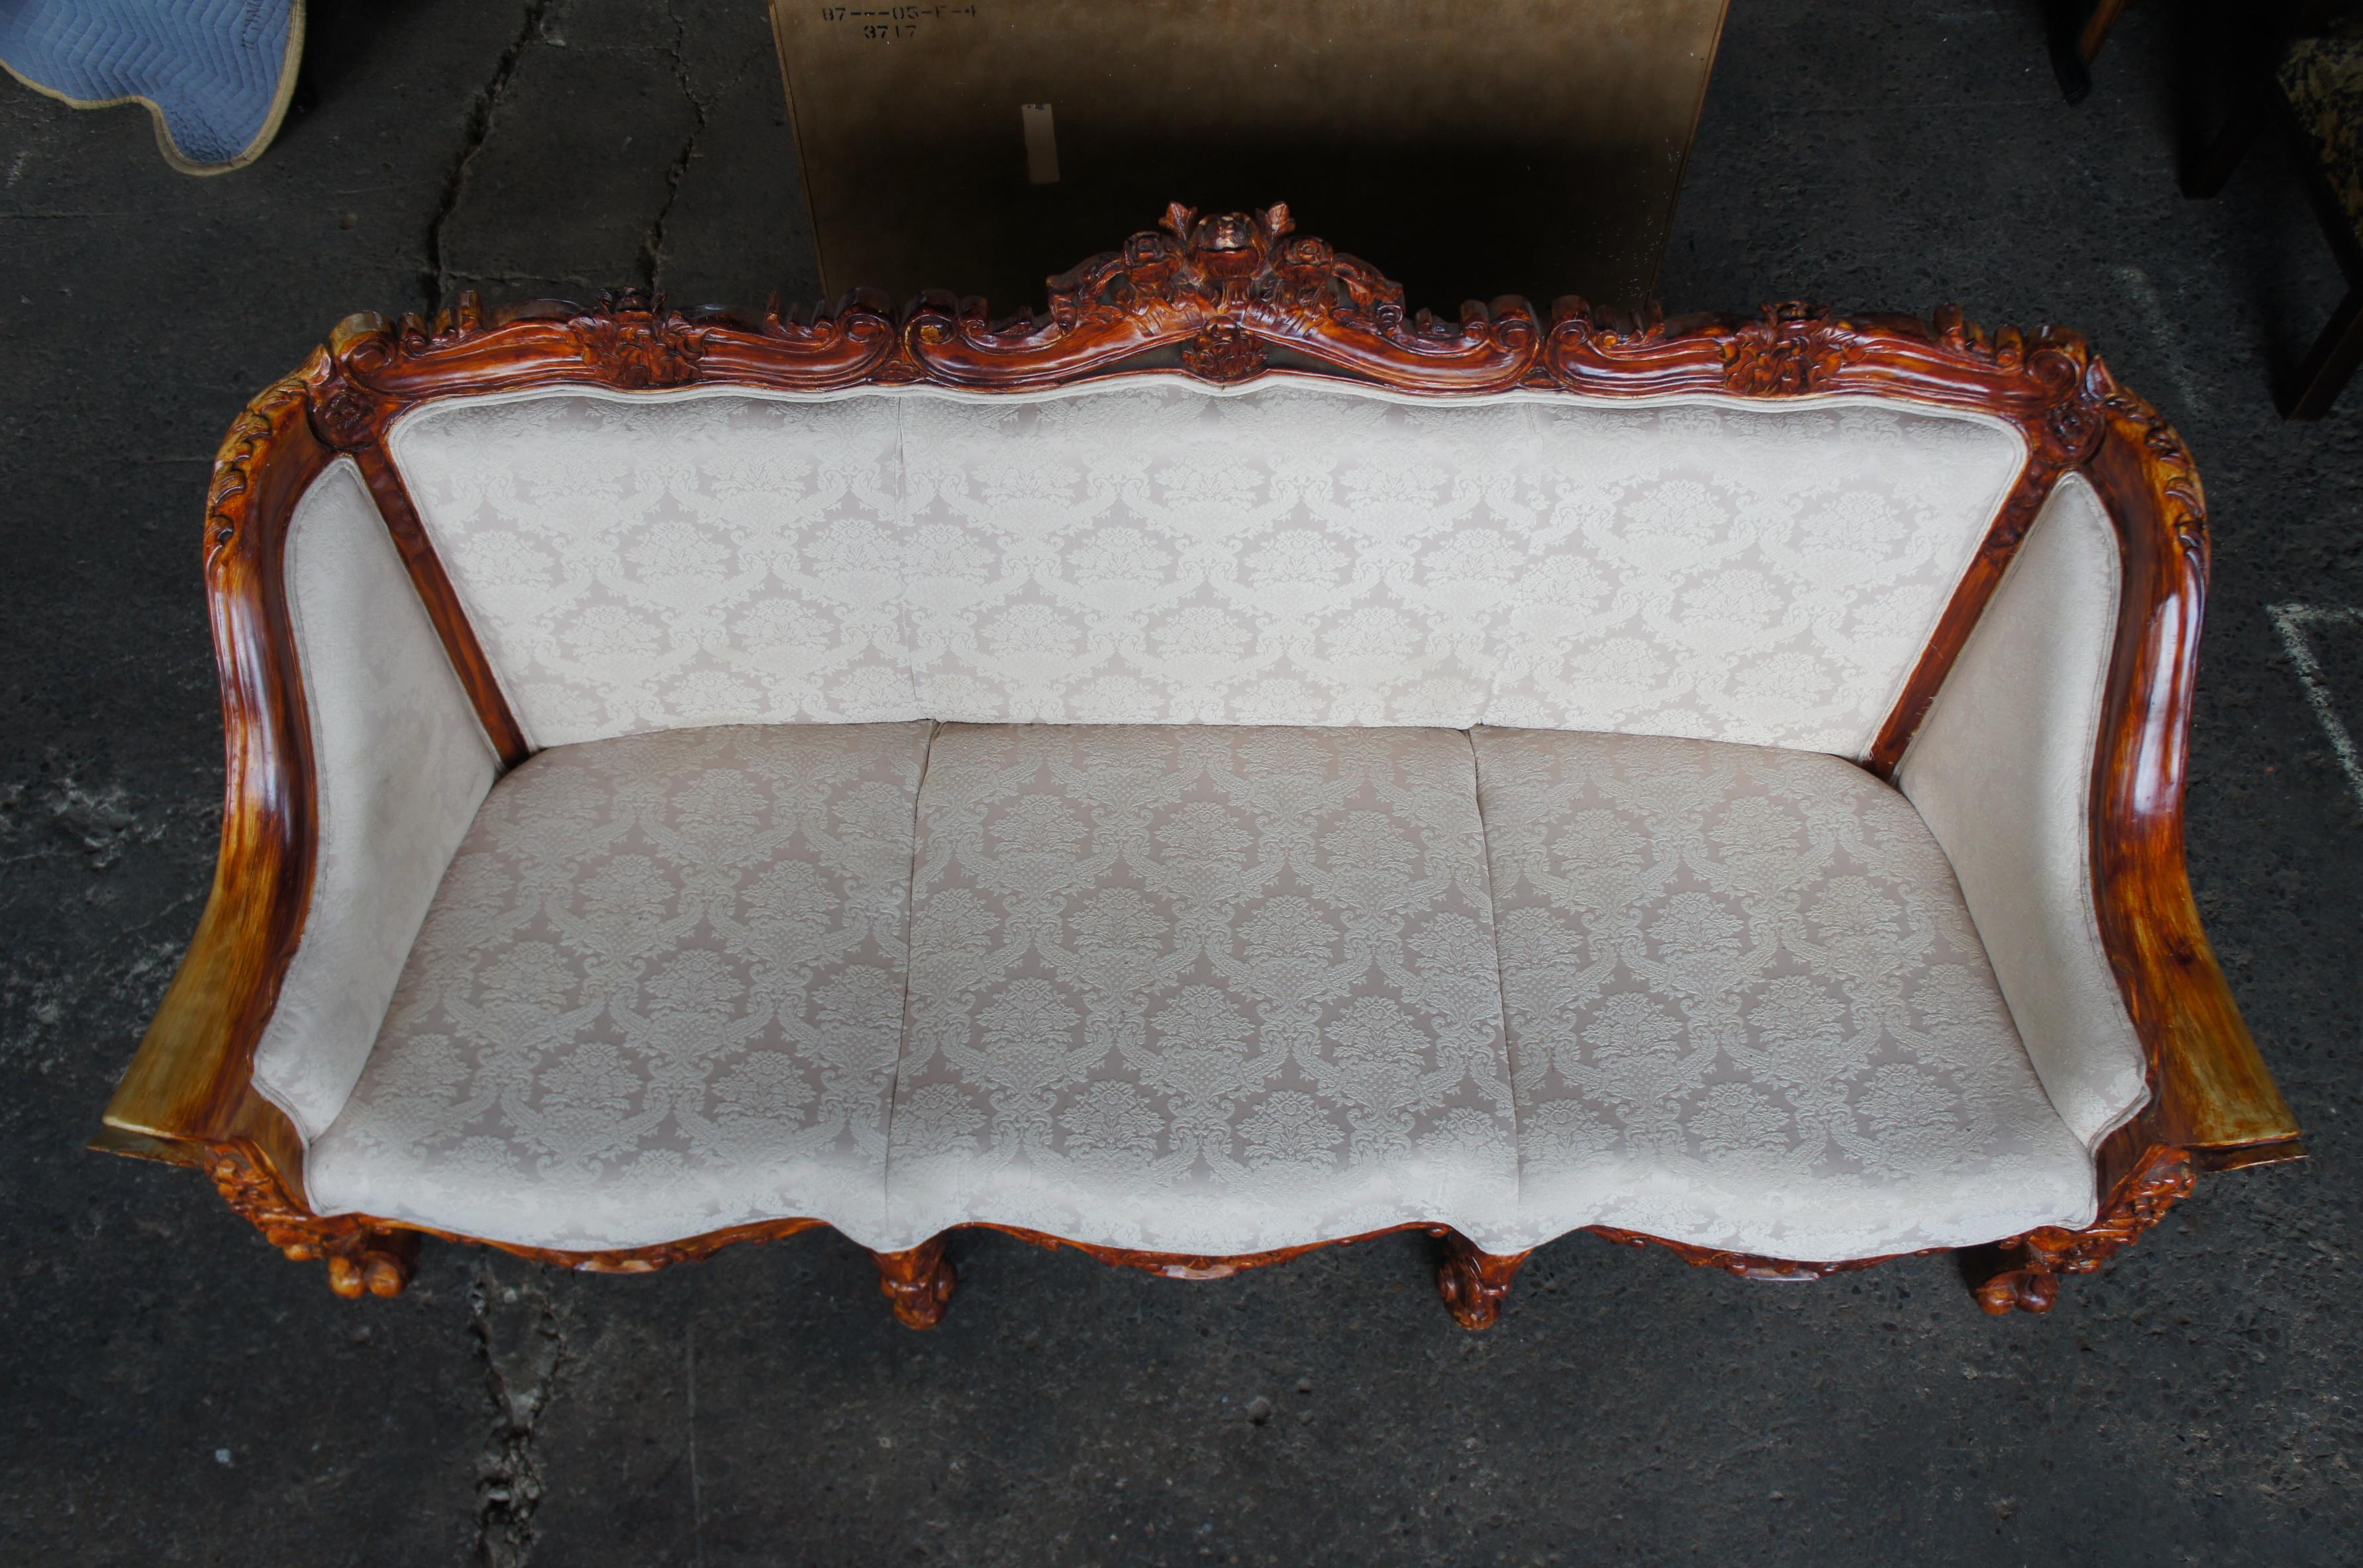 Antiqued Baroque Rococo High Relief Carved Settee Continental Sofa Brocade Seat 4